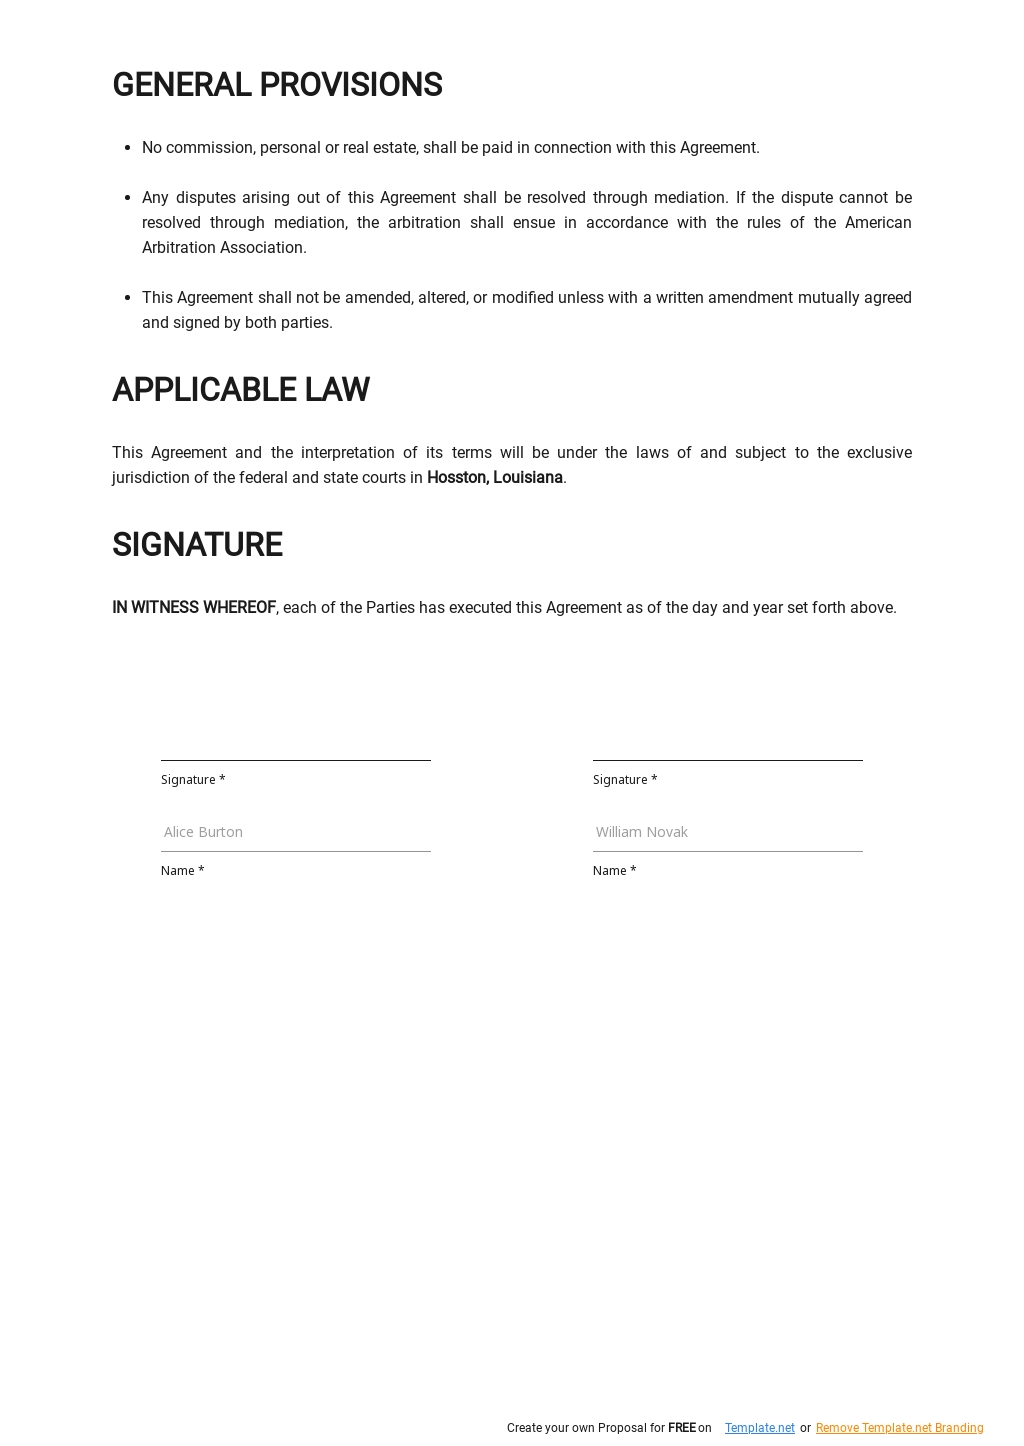 lease purchase business agreement